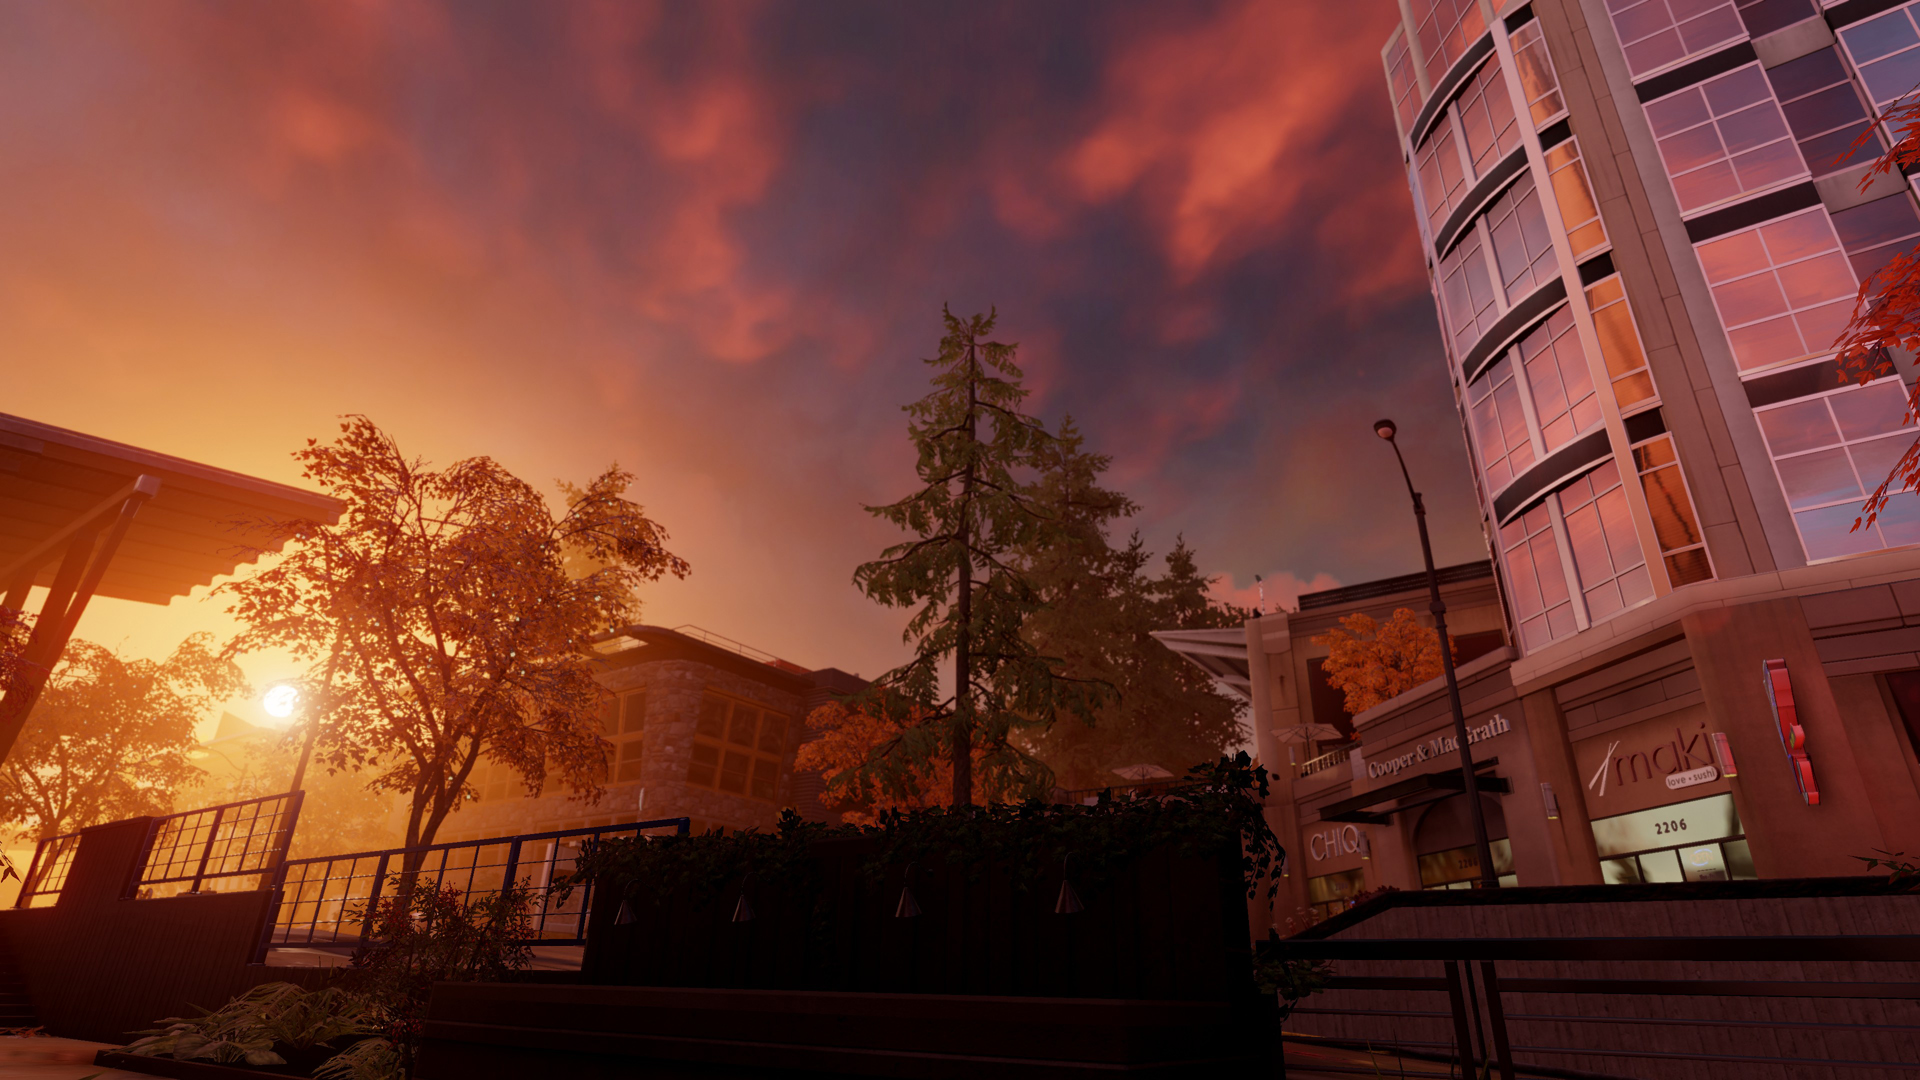 Screens Infamous Second Son - Infamous Second Son Seattle - HD Wallpaper 